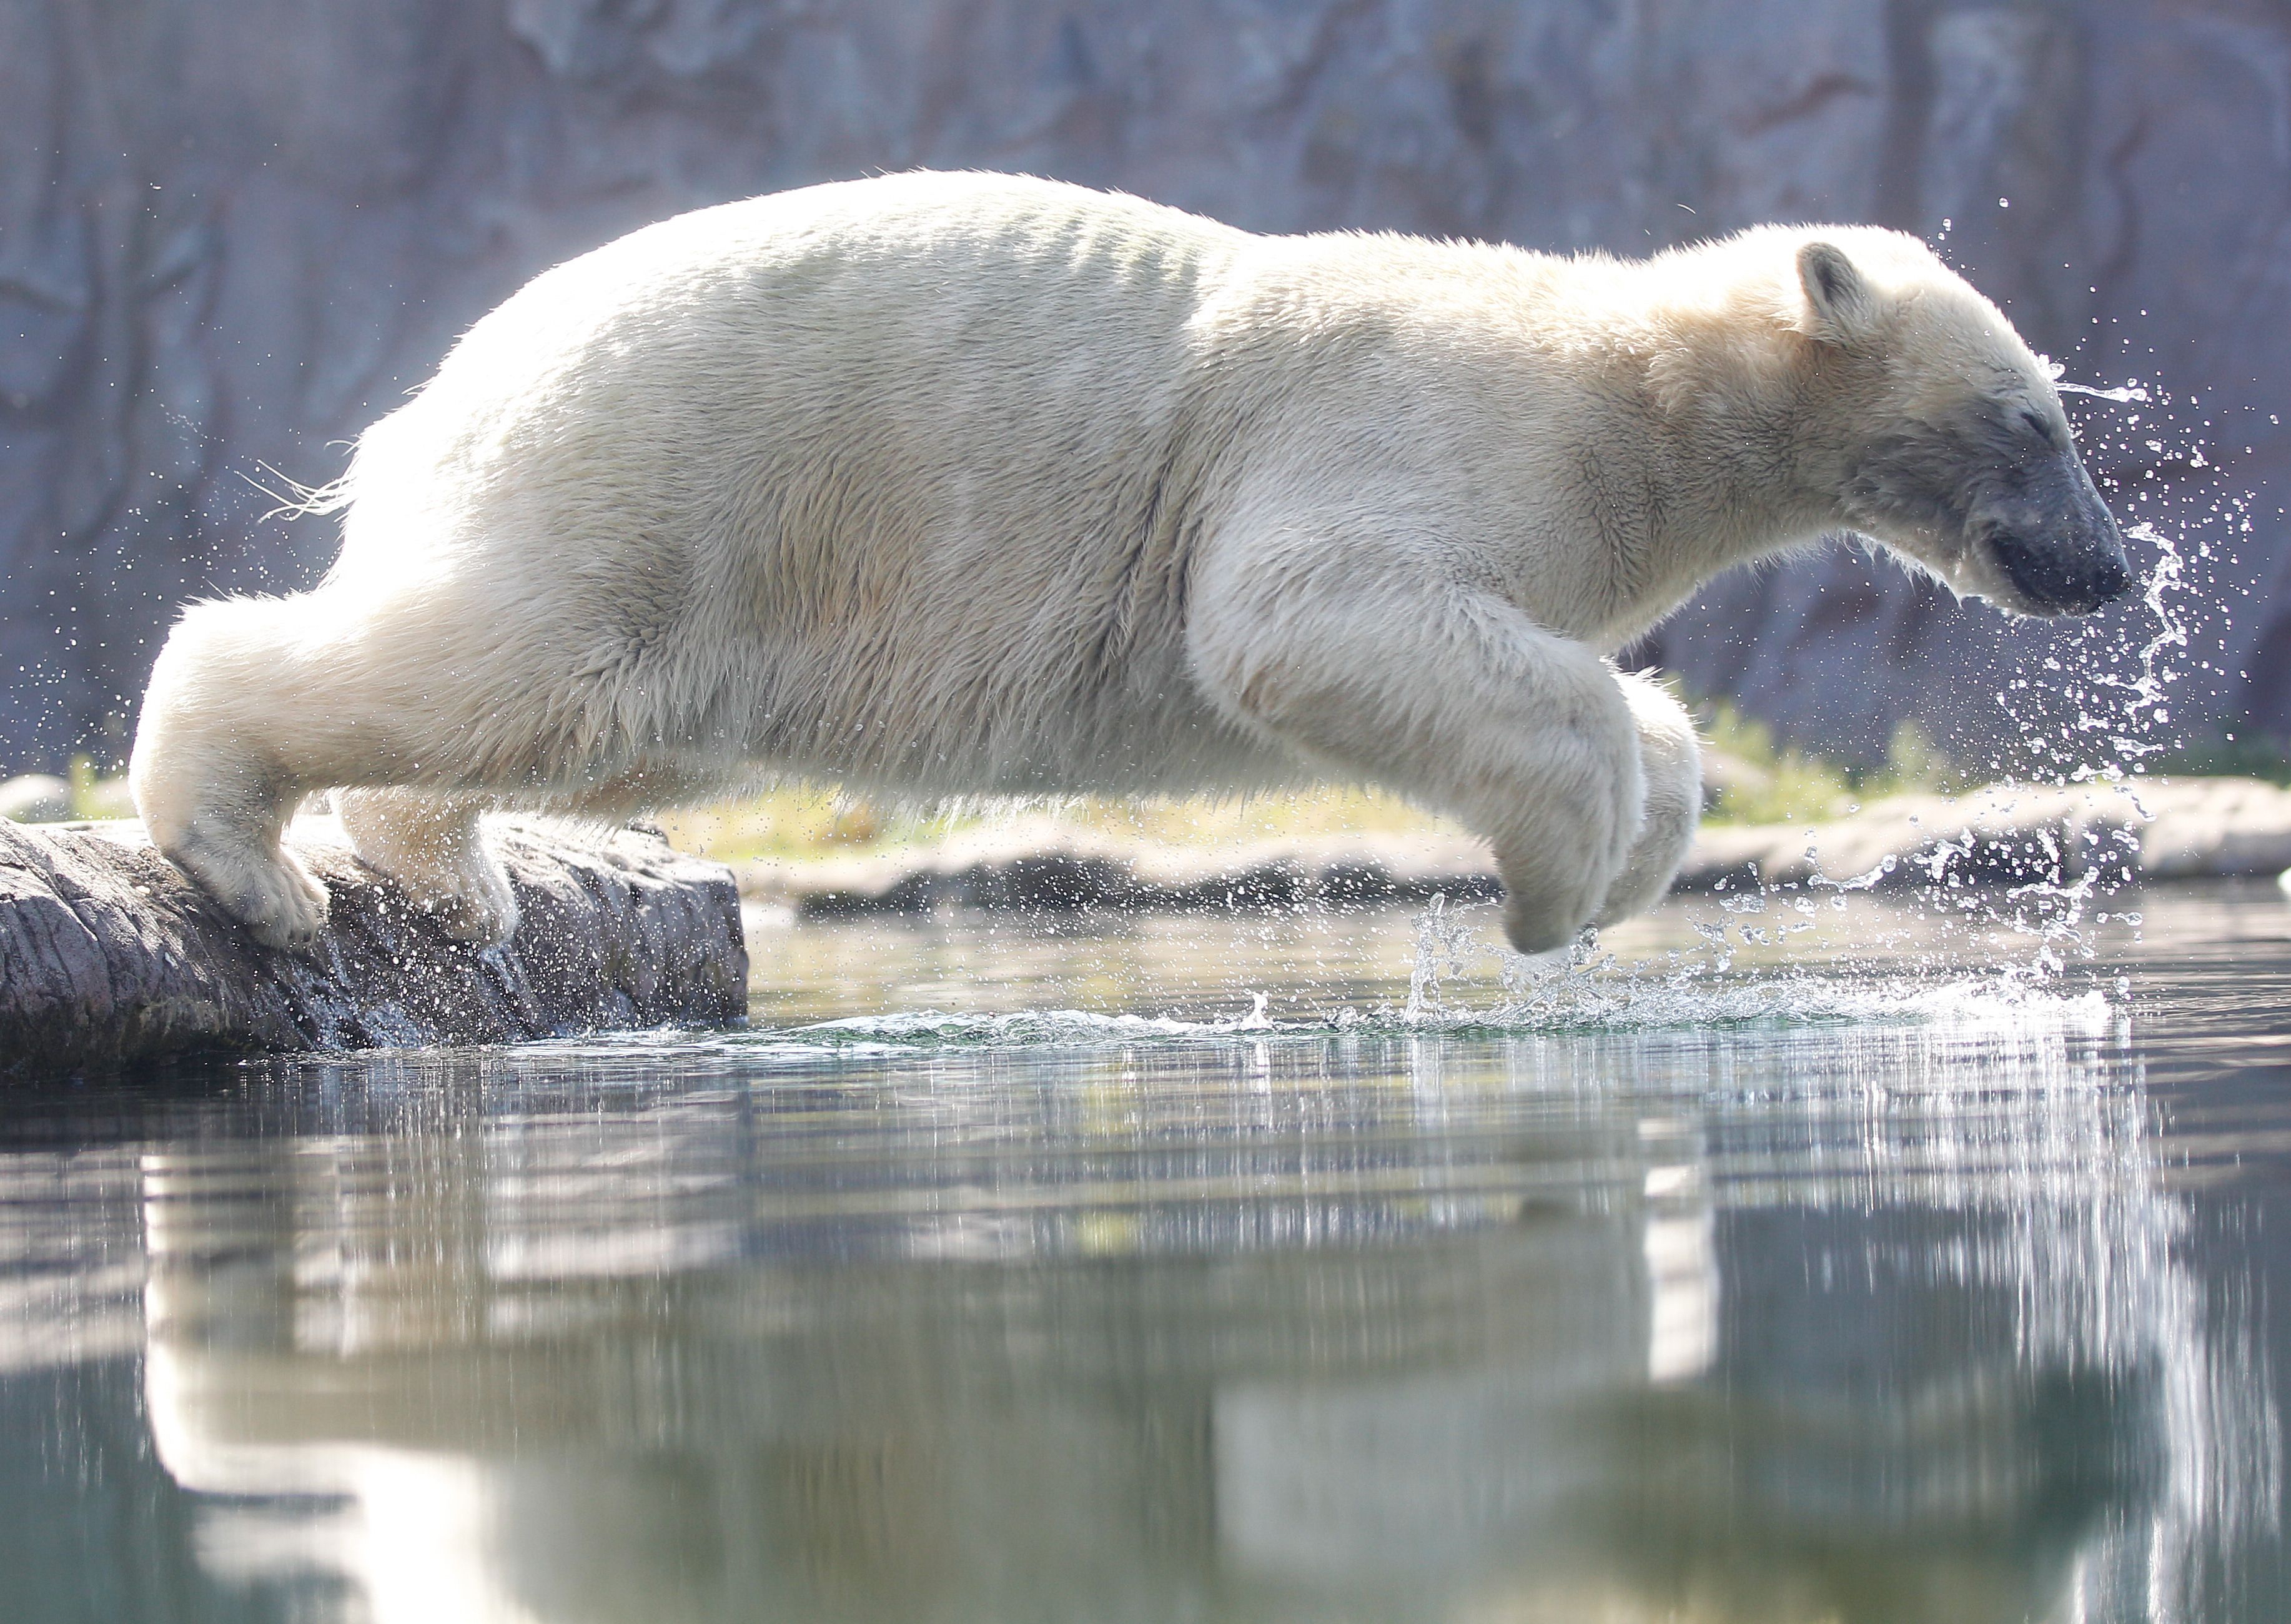 A polar bear named Nanook jumps in the water at the zoo in Gelsenkirchen, western Germany on June 25, 2019 as temperatures topped 33 degrees Celsius. (Photo credit ROLAND WEIHRAUCH/AFP/Getty Images)